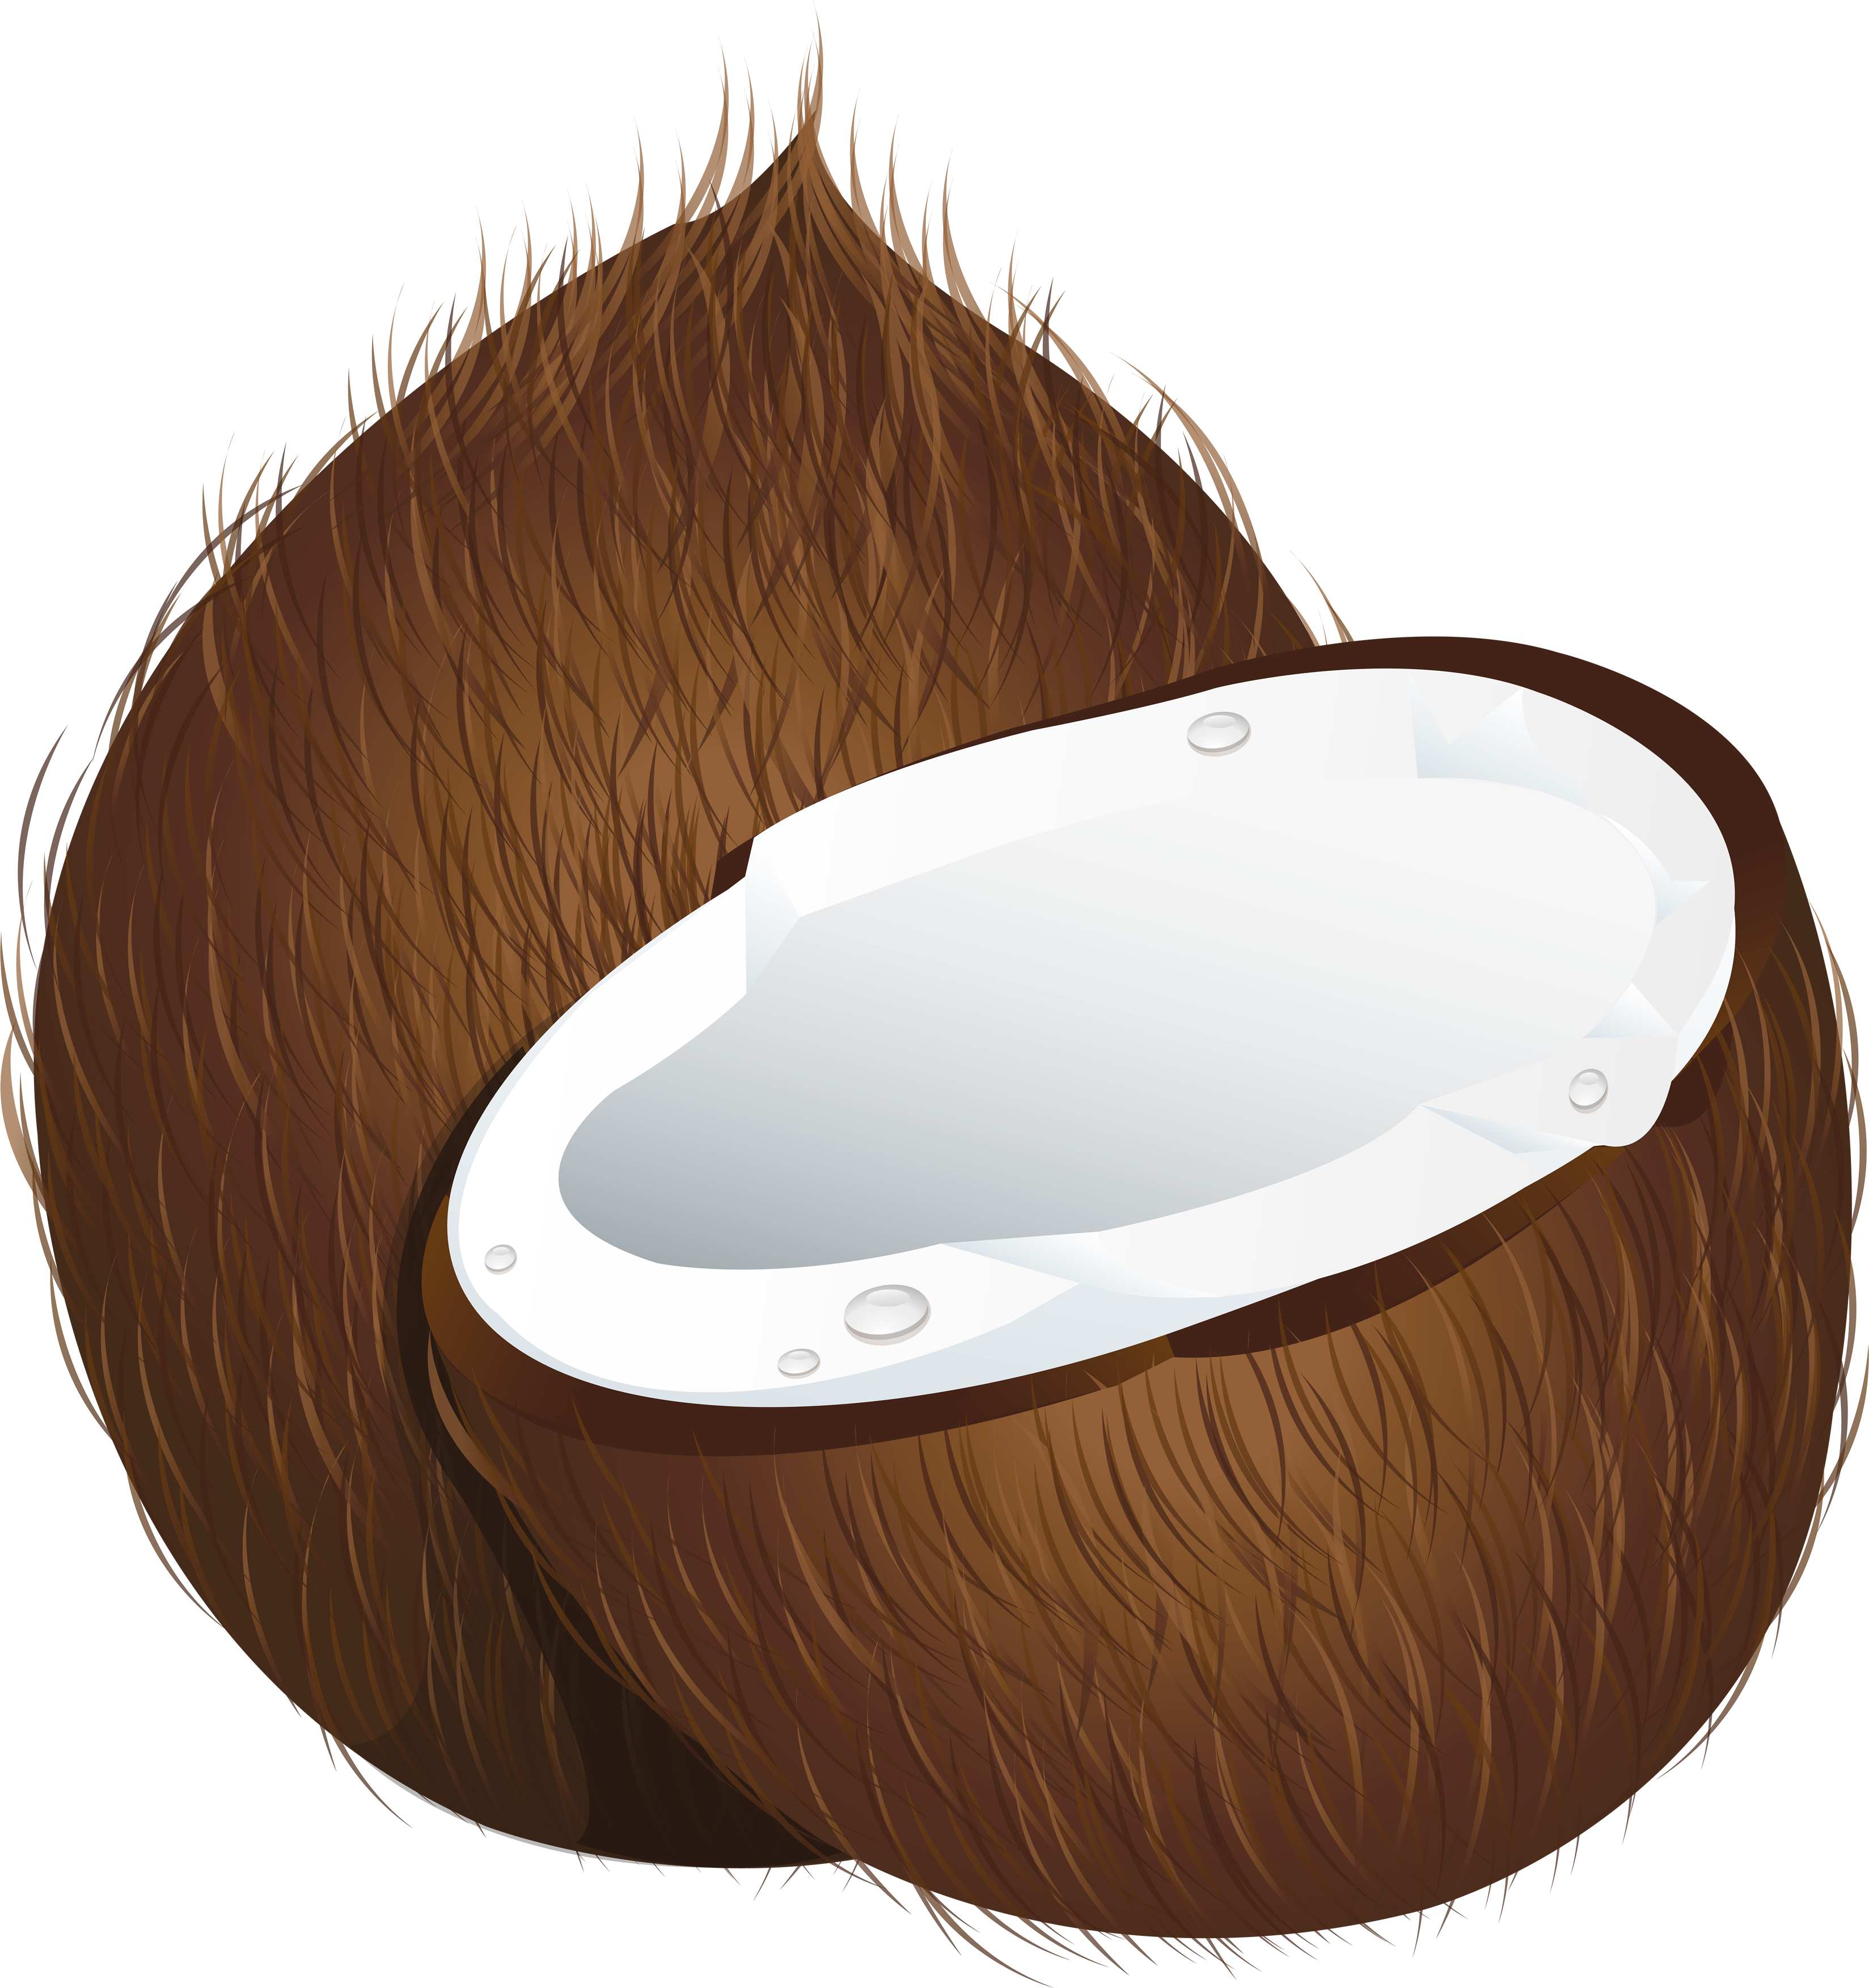 Coconut PNG image free download 